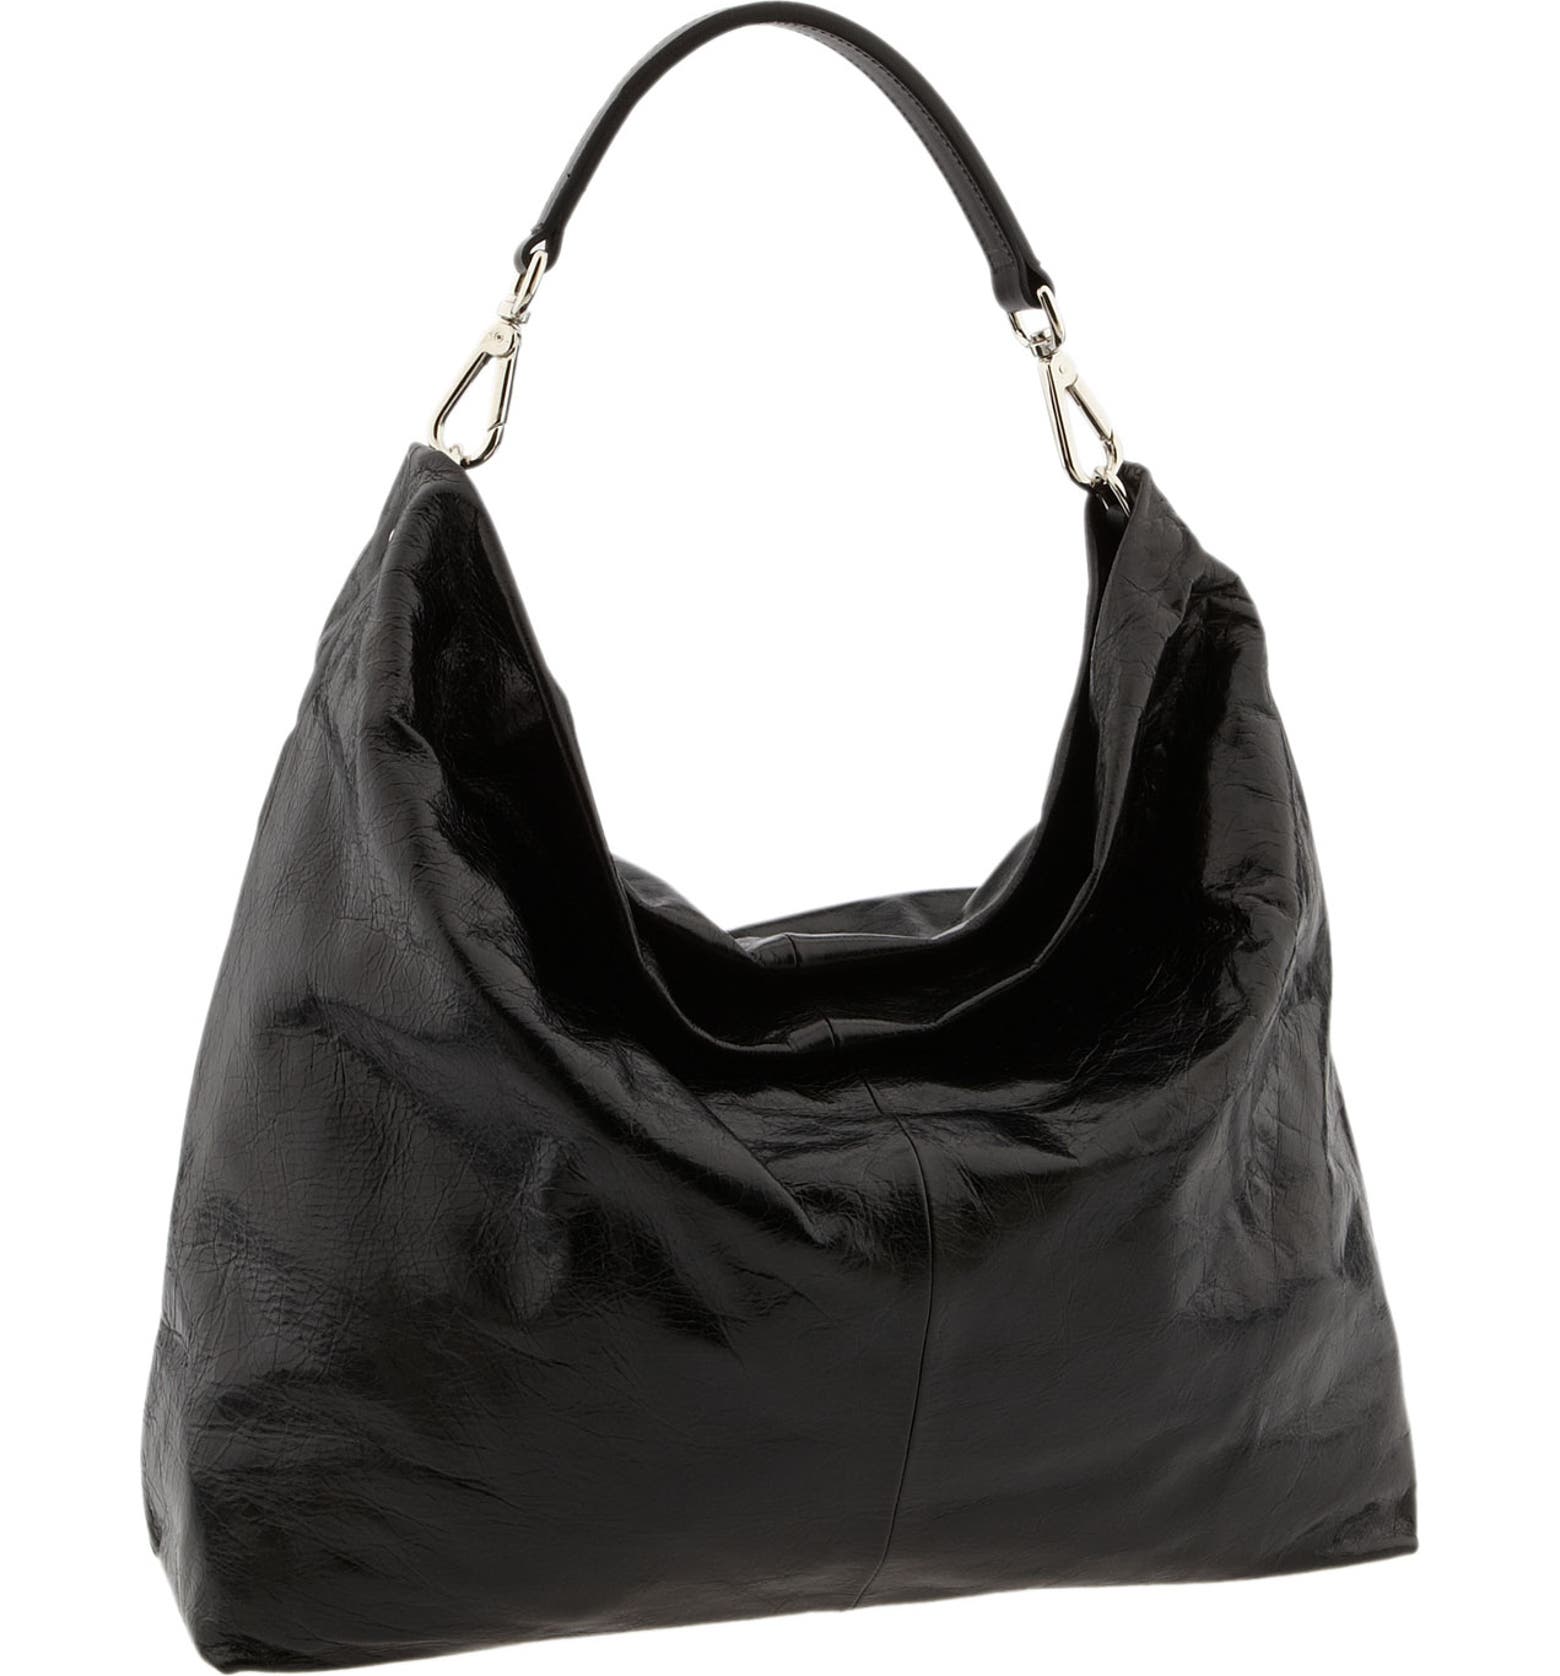 Gianni Chiarini 'Large' Slouchy Leather Hobo | Nordstrom